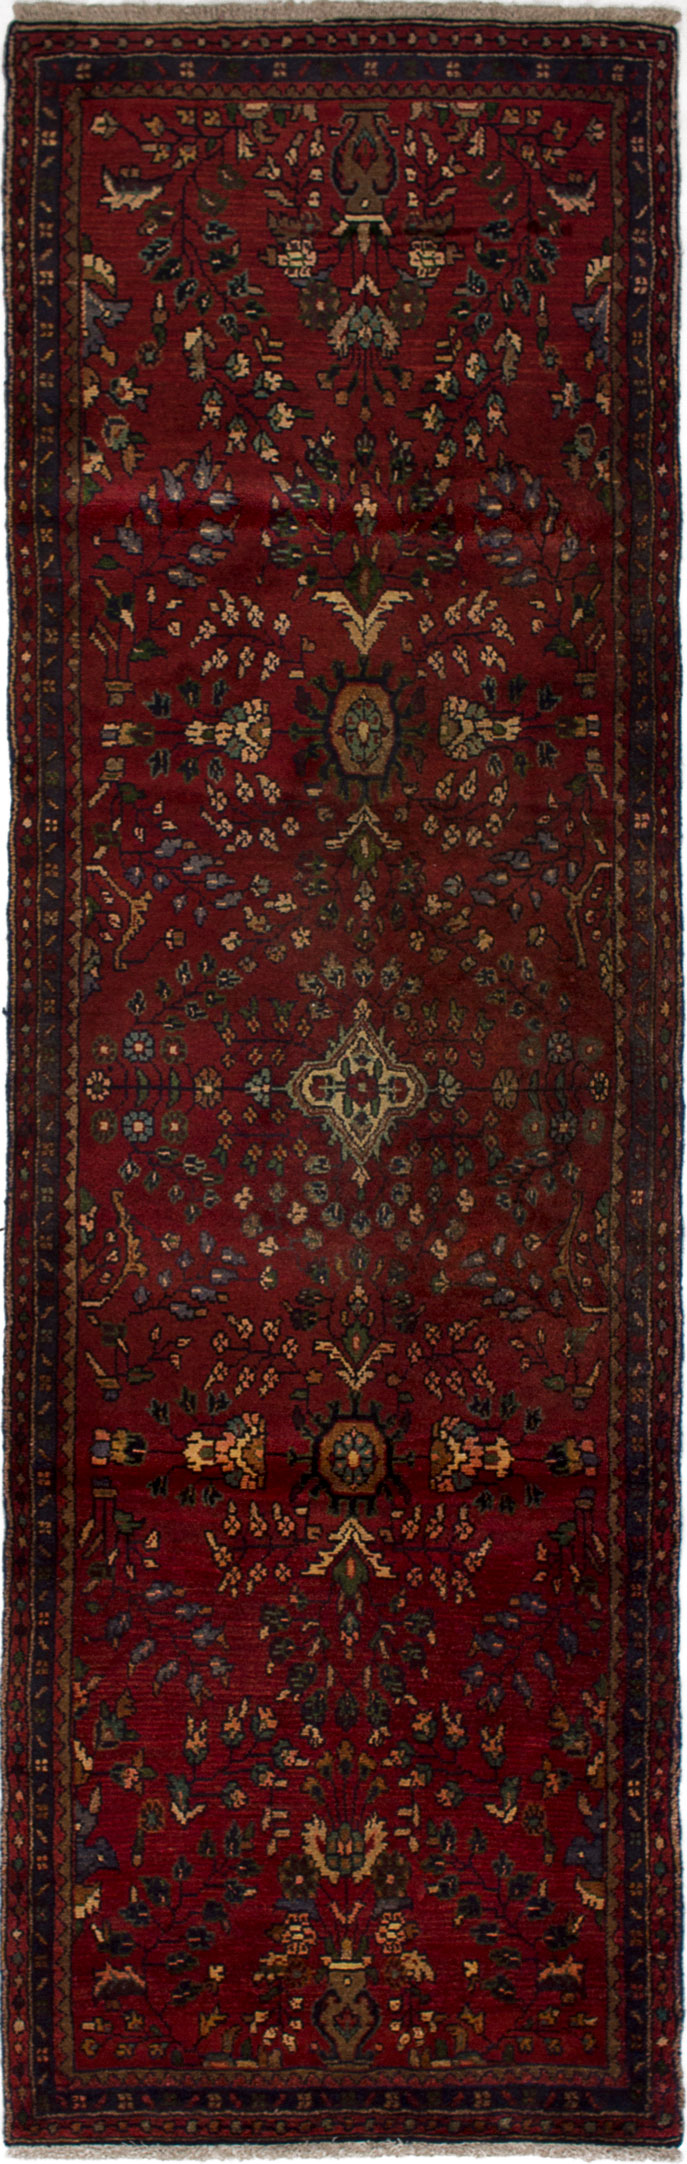 Hand-knotted Mahal Dark Red Wool Rug 2'10" x 9'4" Size: 2'10" x 9'4"  